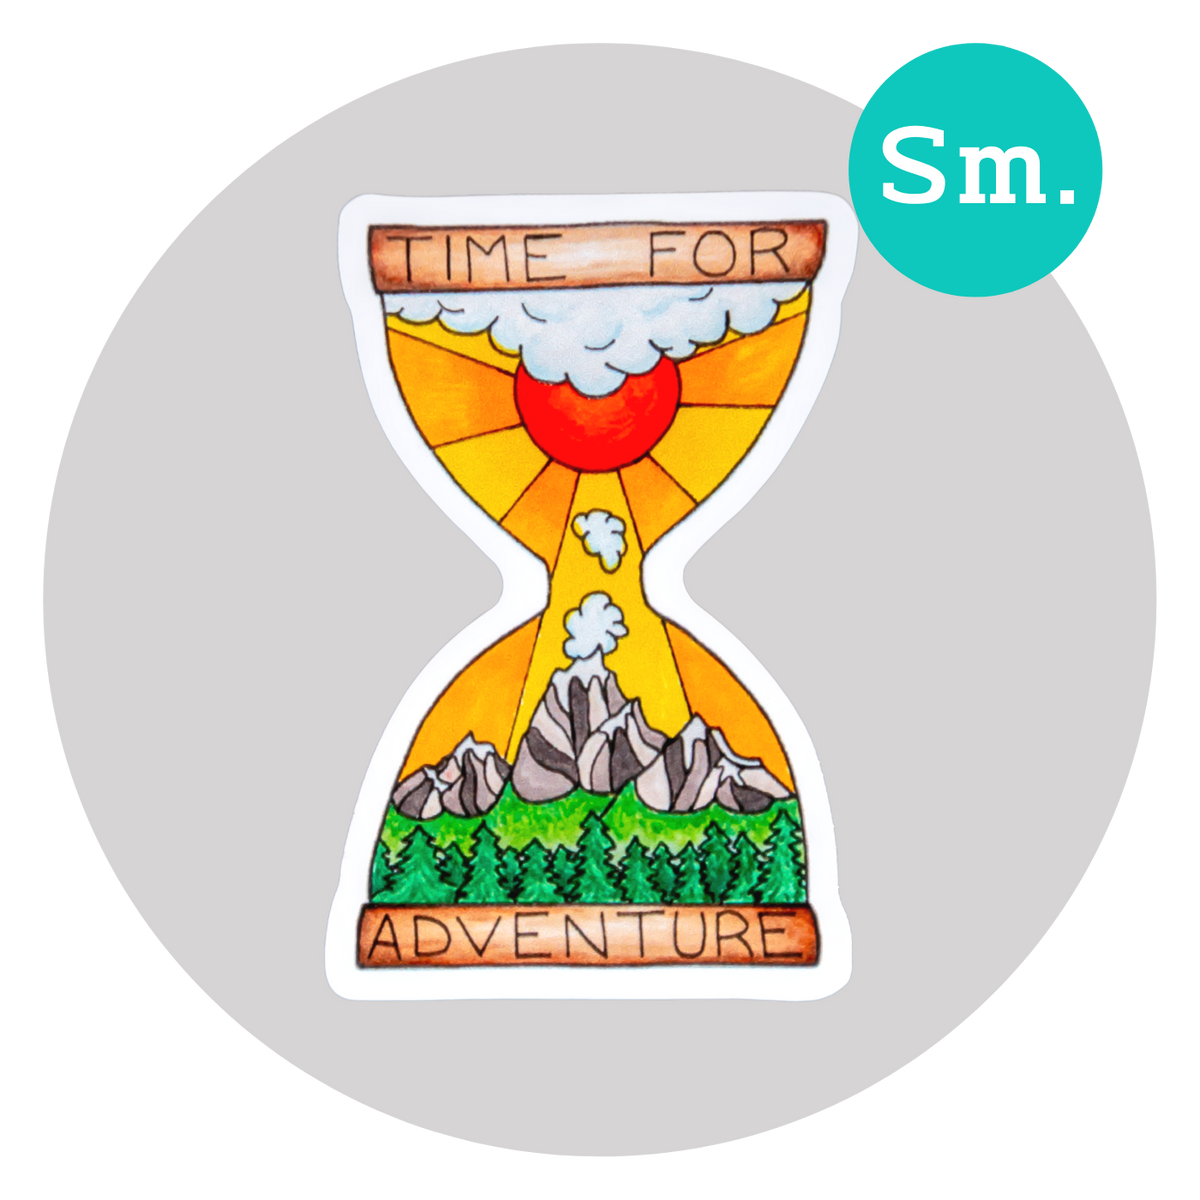 Time for Adventure Sticker ⌲ Small 2.25 "x1.75"